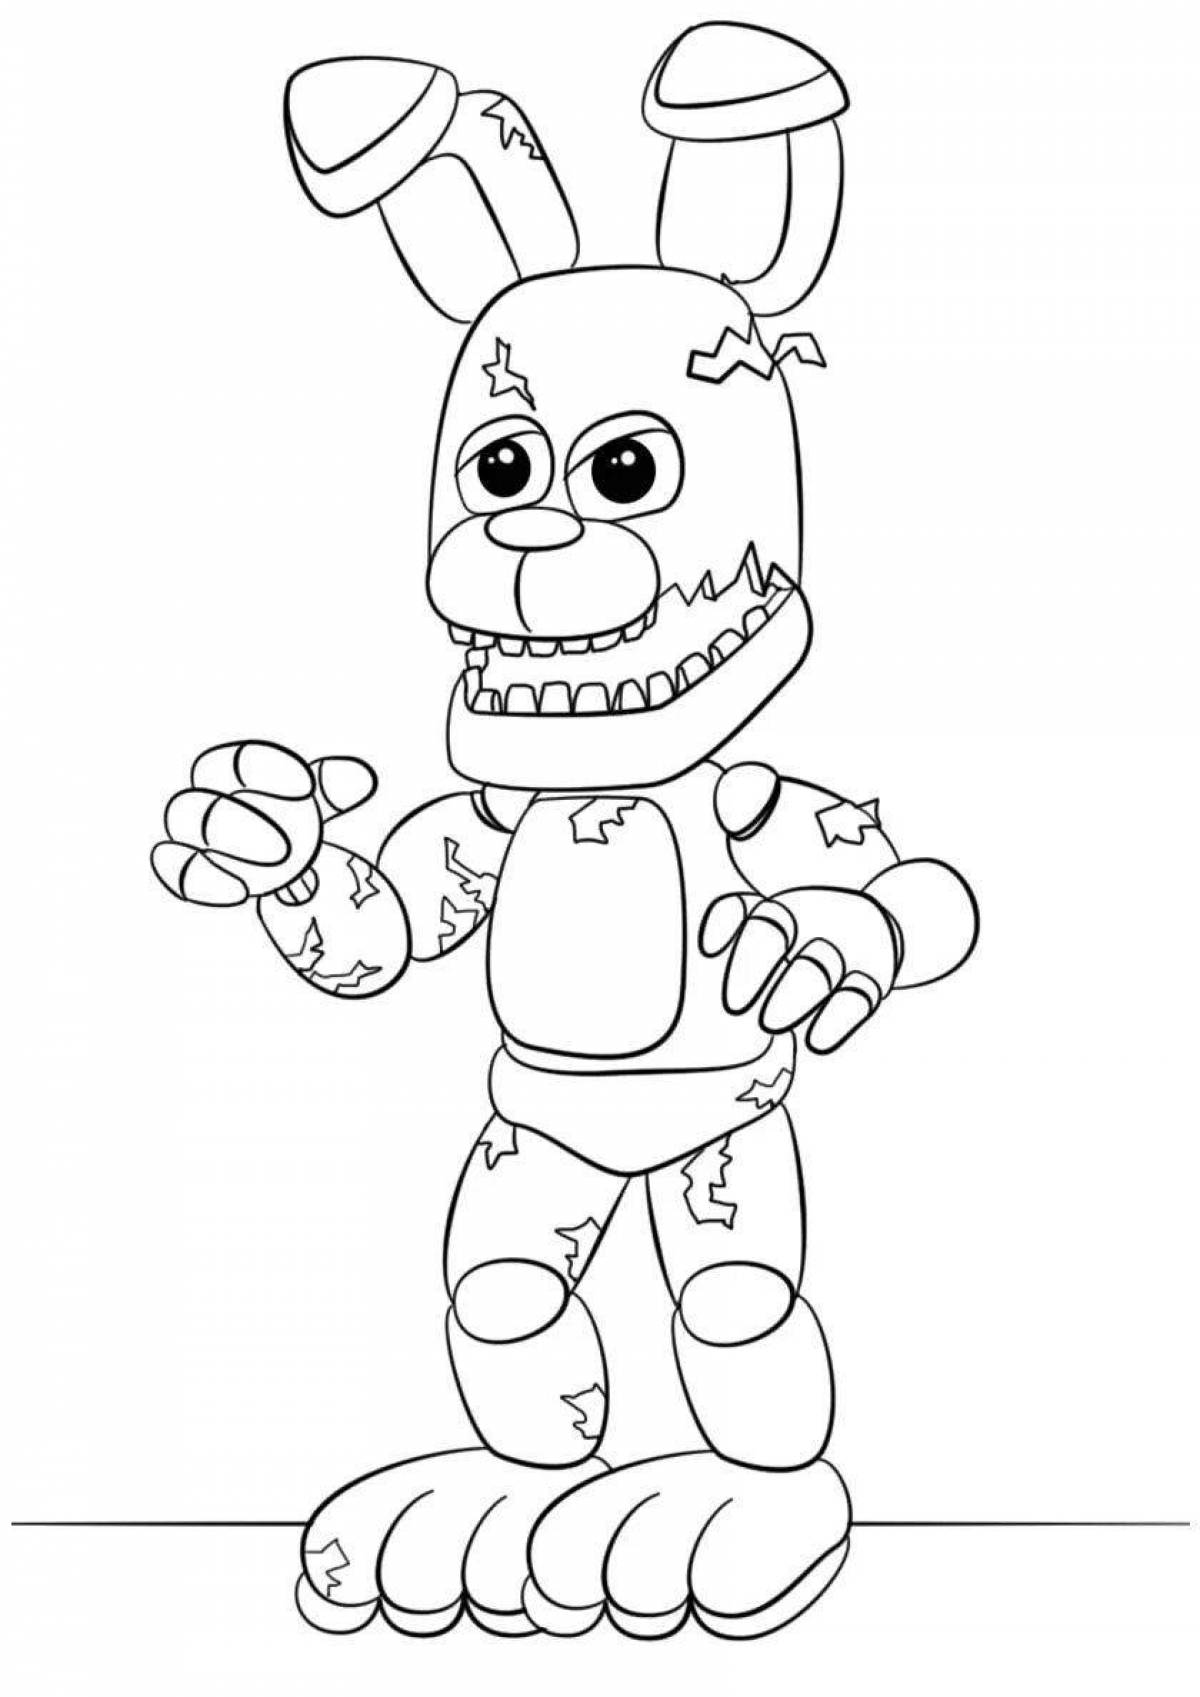 Amazing fnaf coloring pages for kids